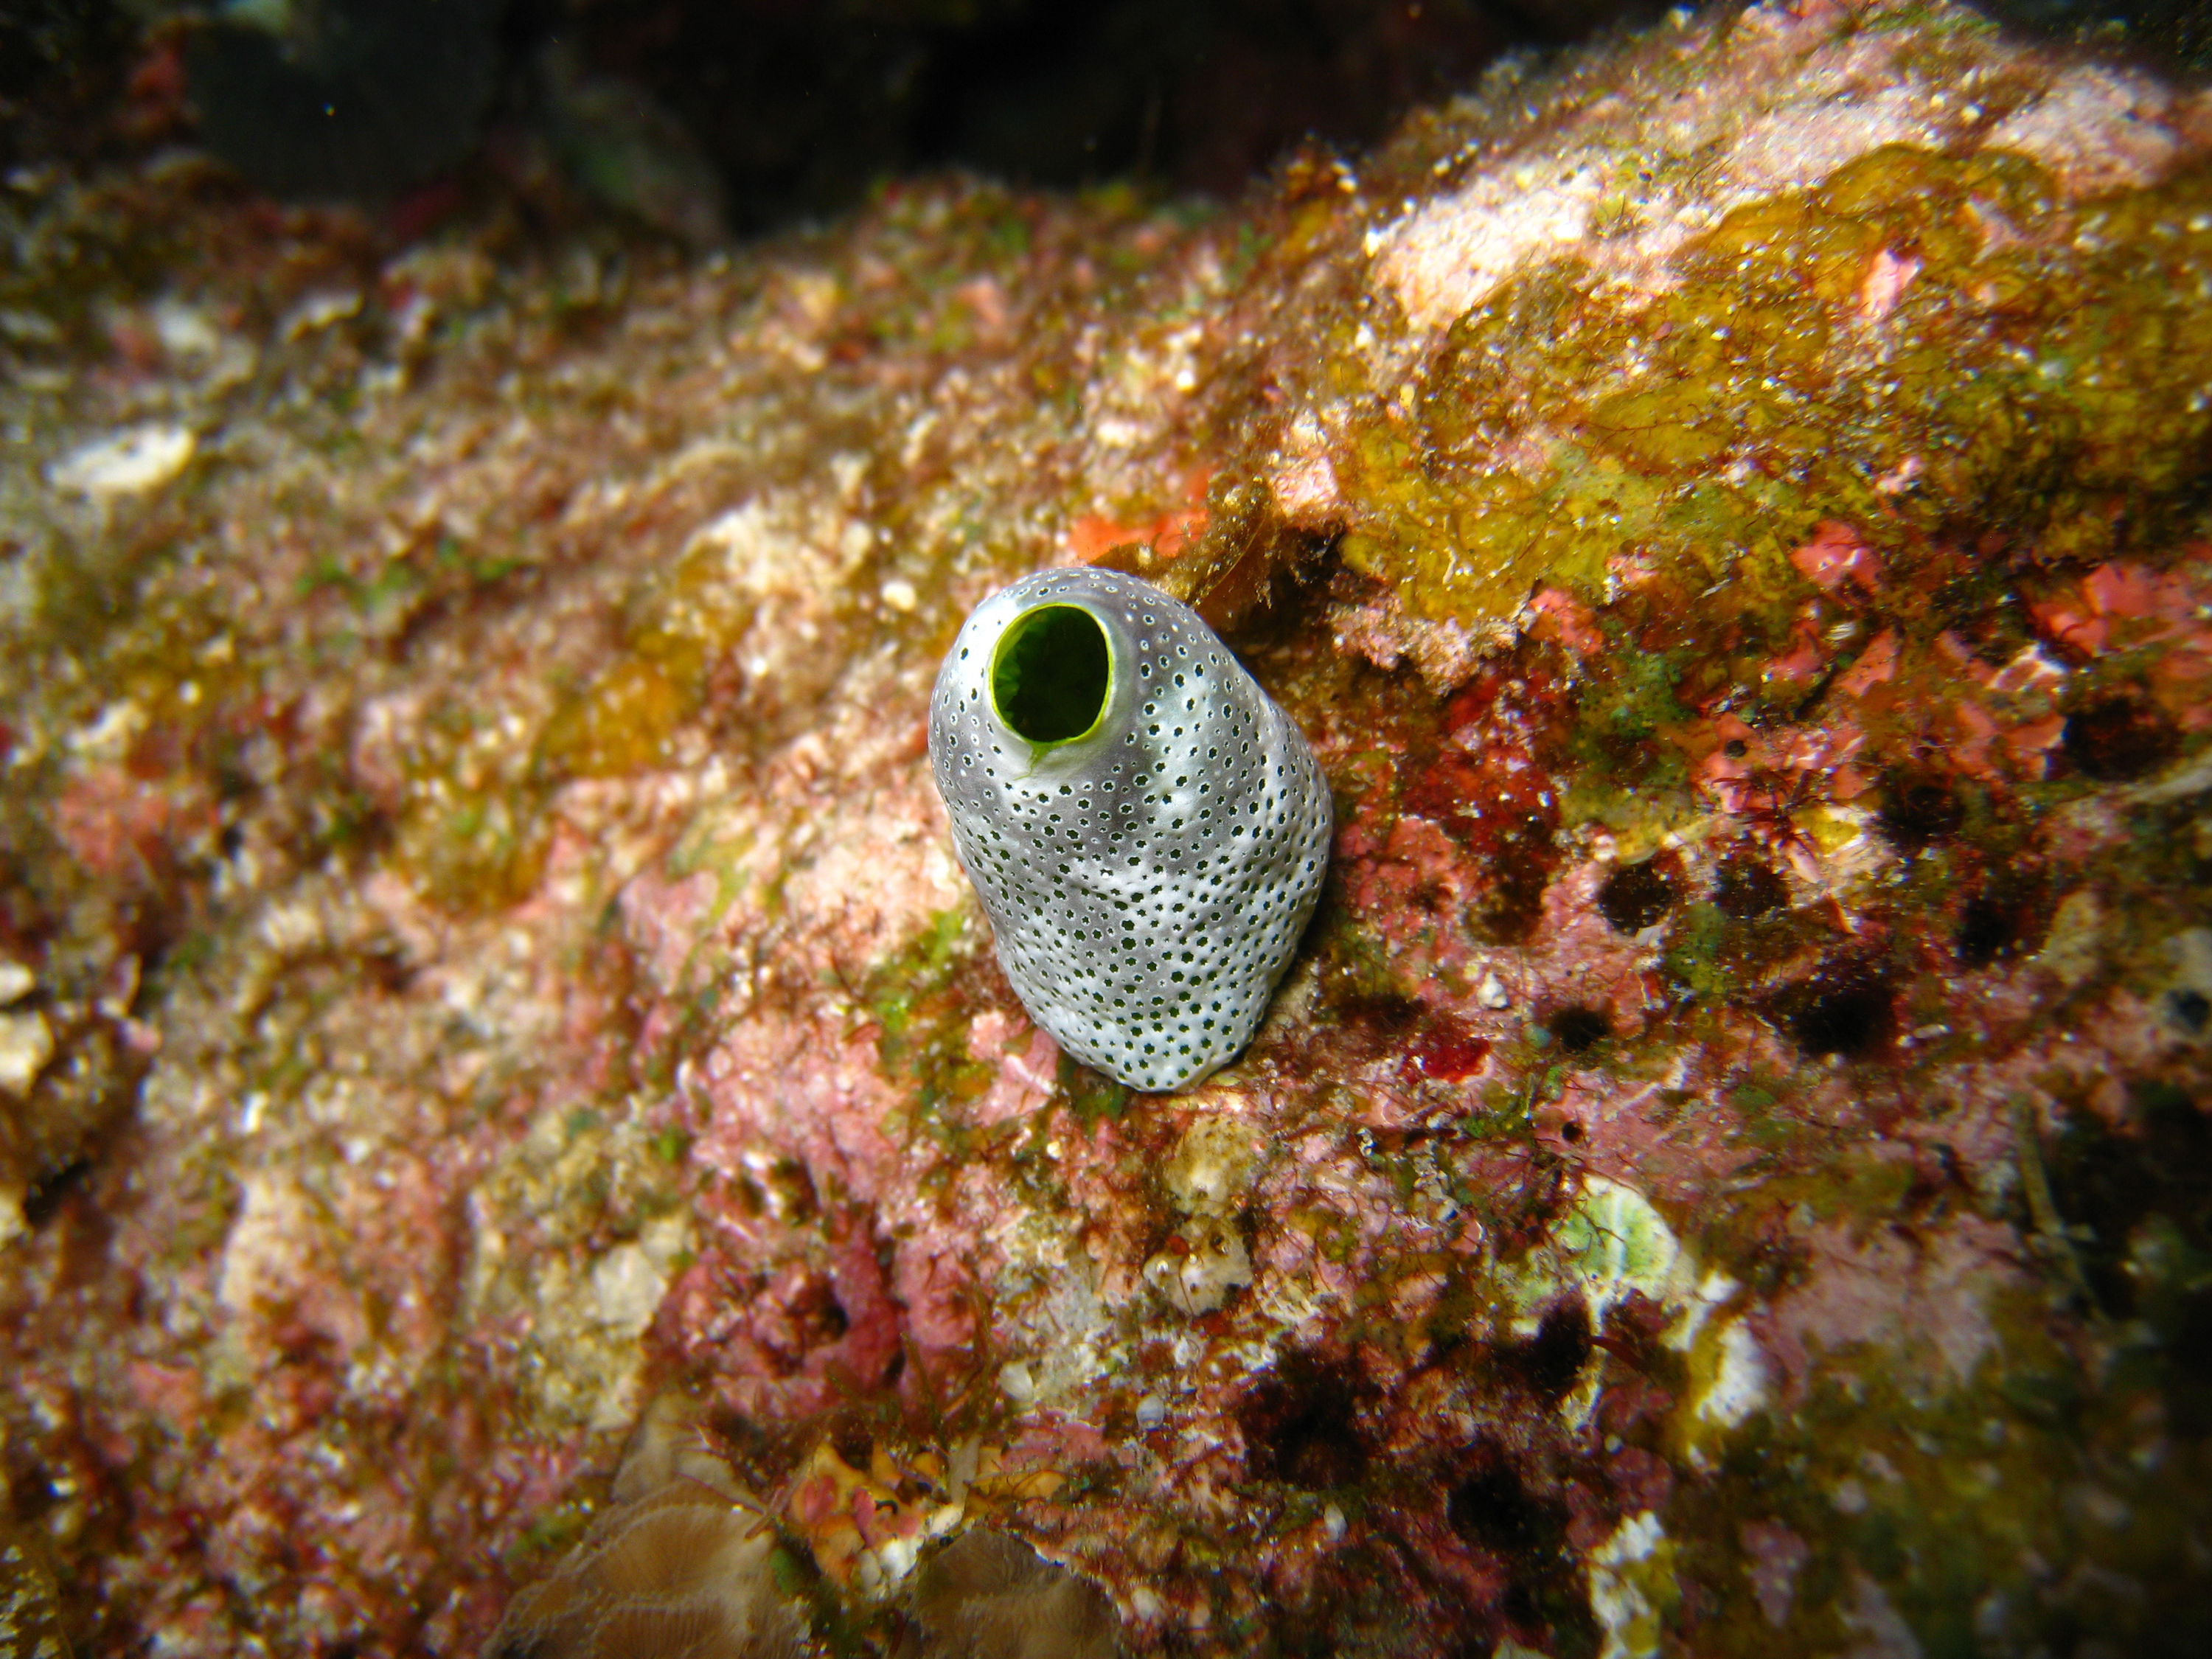 Tiny green and silver sponge